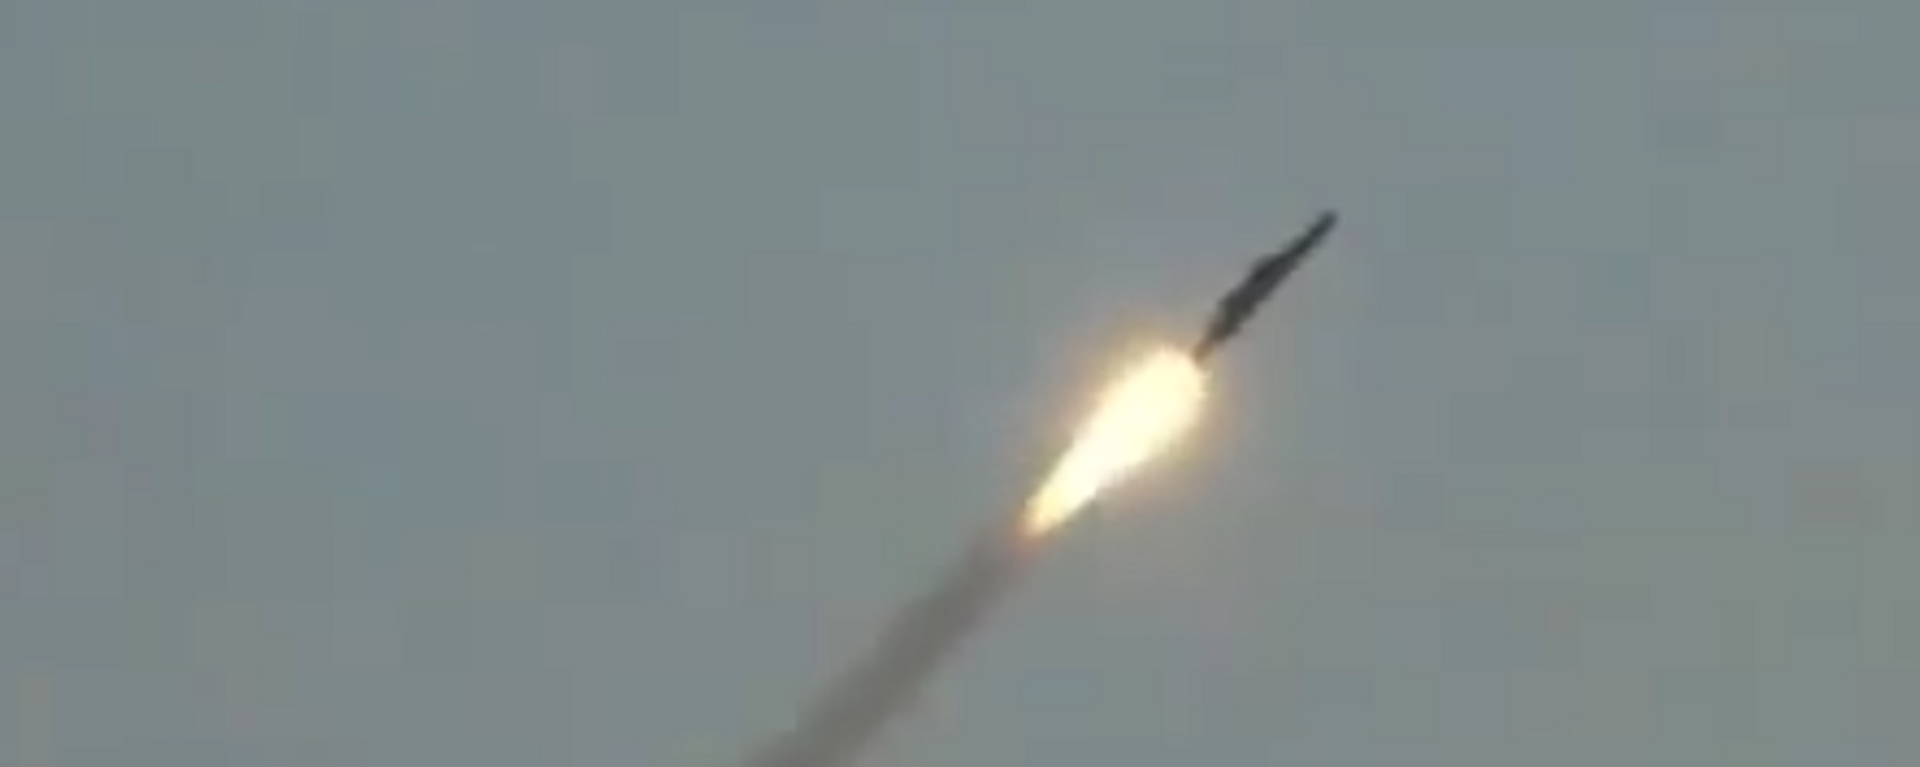 Screenshot captures image of Iran's new cruise missile capable of reaching a controlled distance of 1,650 kilometers. - Sputnik International, 1920, 29.05.2023